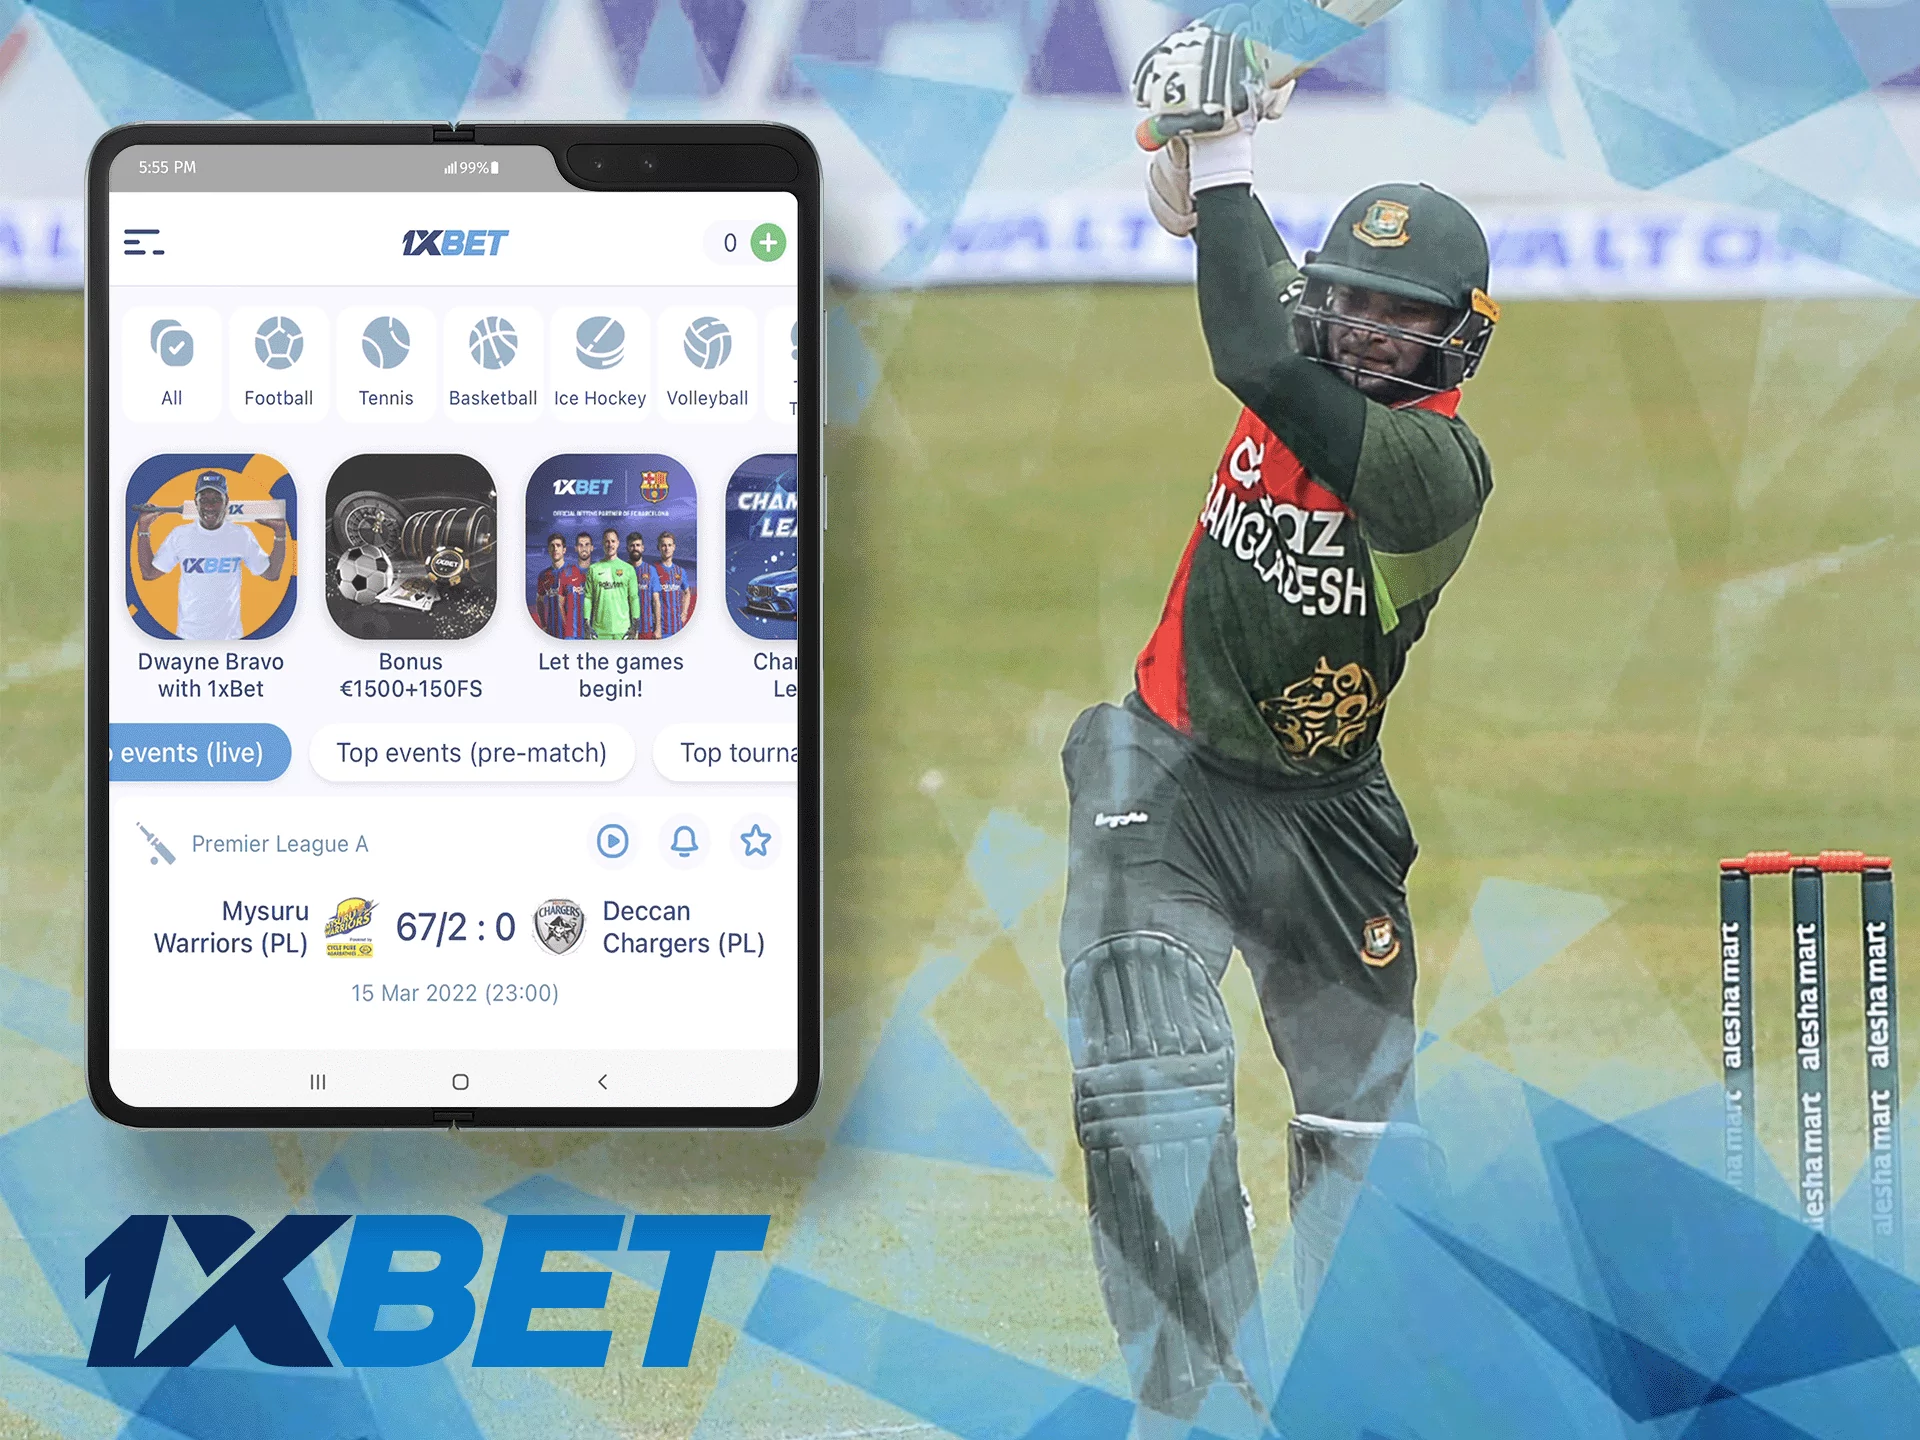 1xbet app gives an opportunity to bet on all popular sports in Bangladesh anywhere.